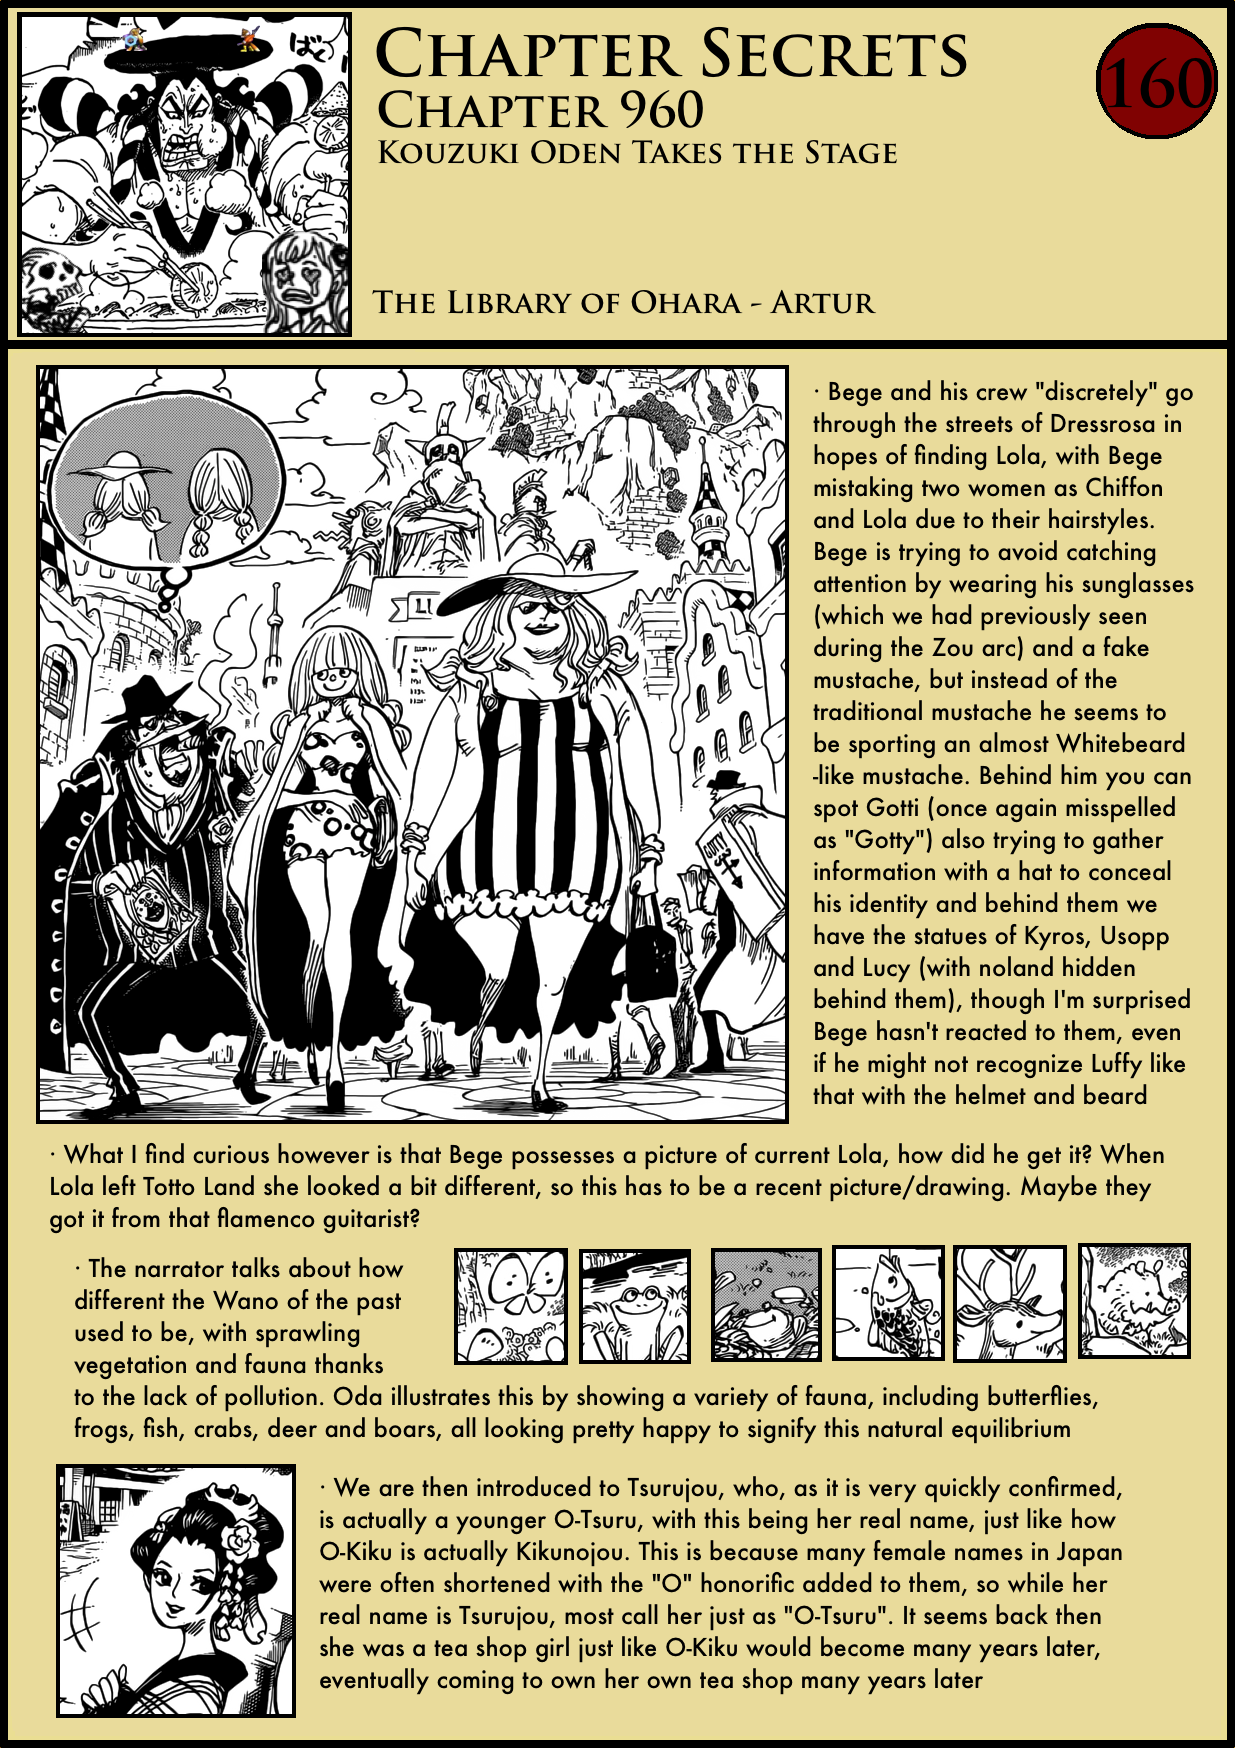 Chapter Secrets Chapter 960 In Depth Analysis The Library Of Ohara